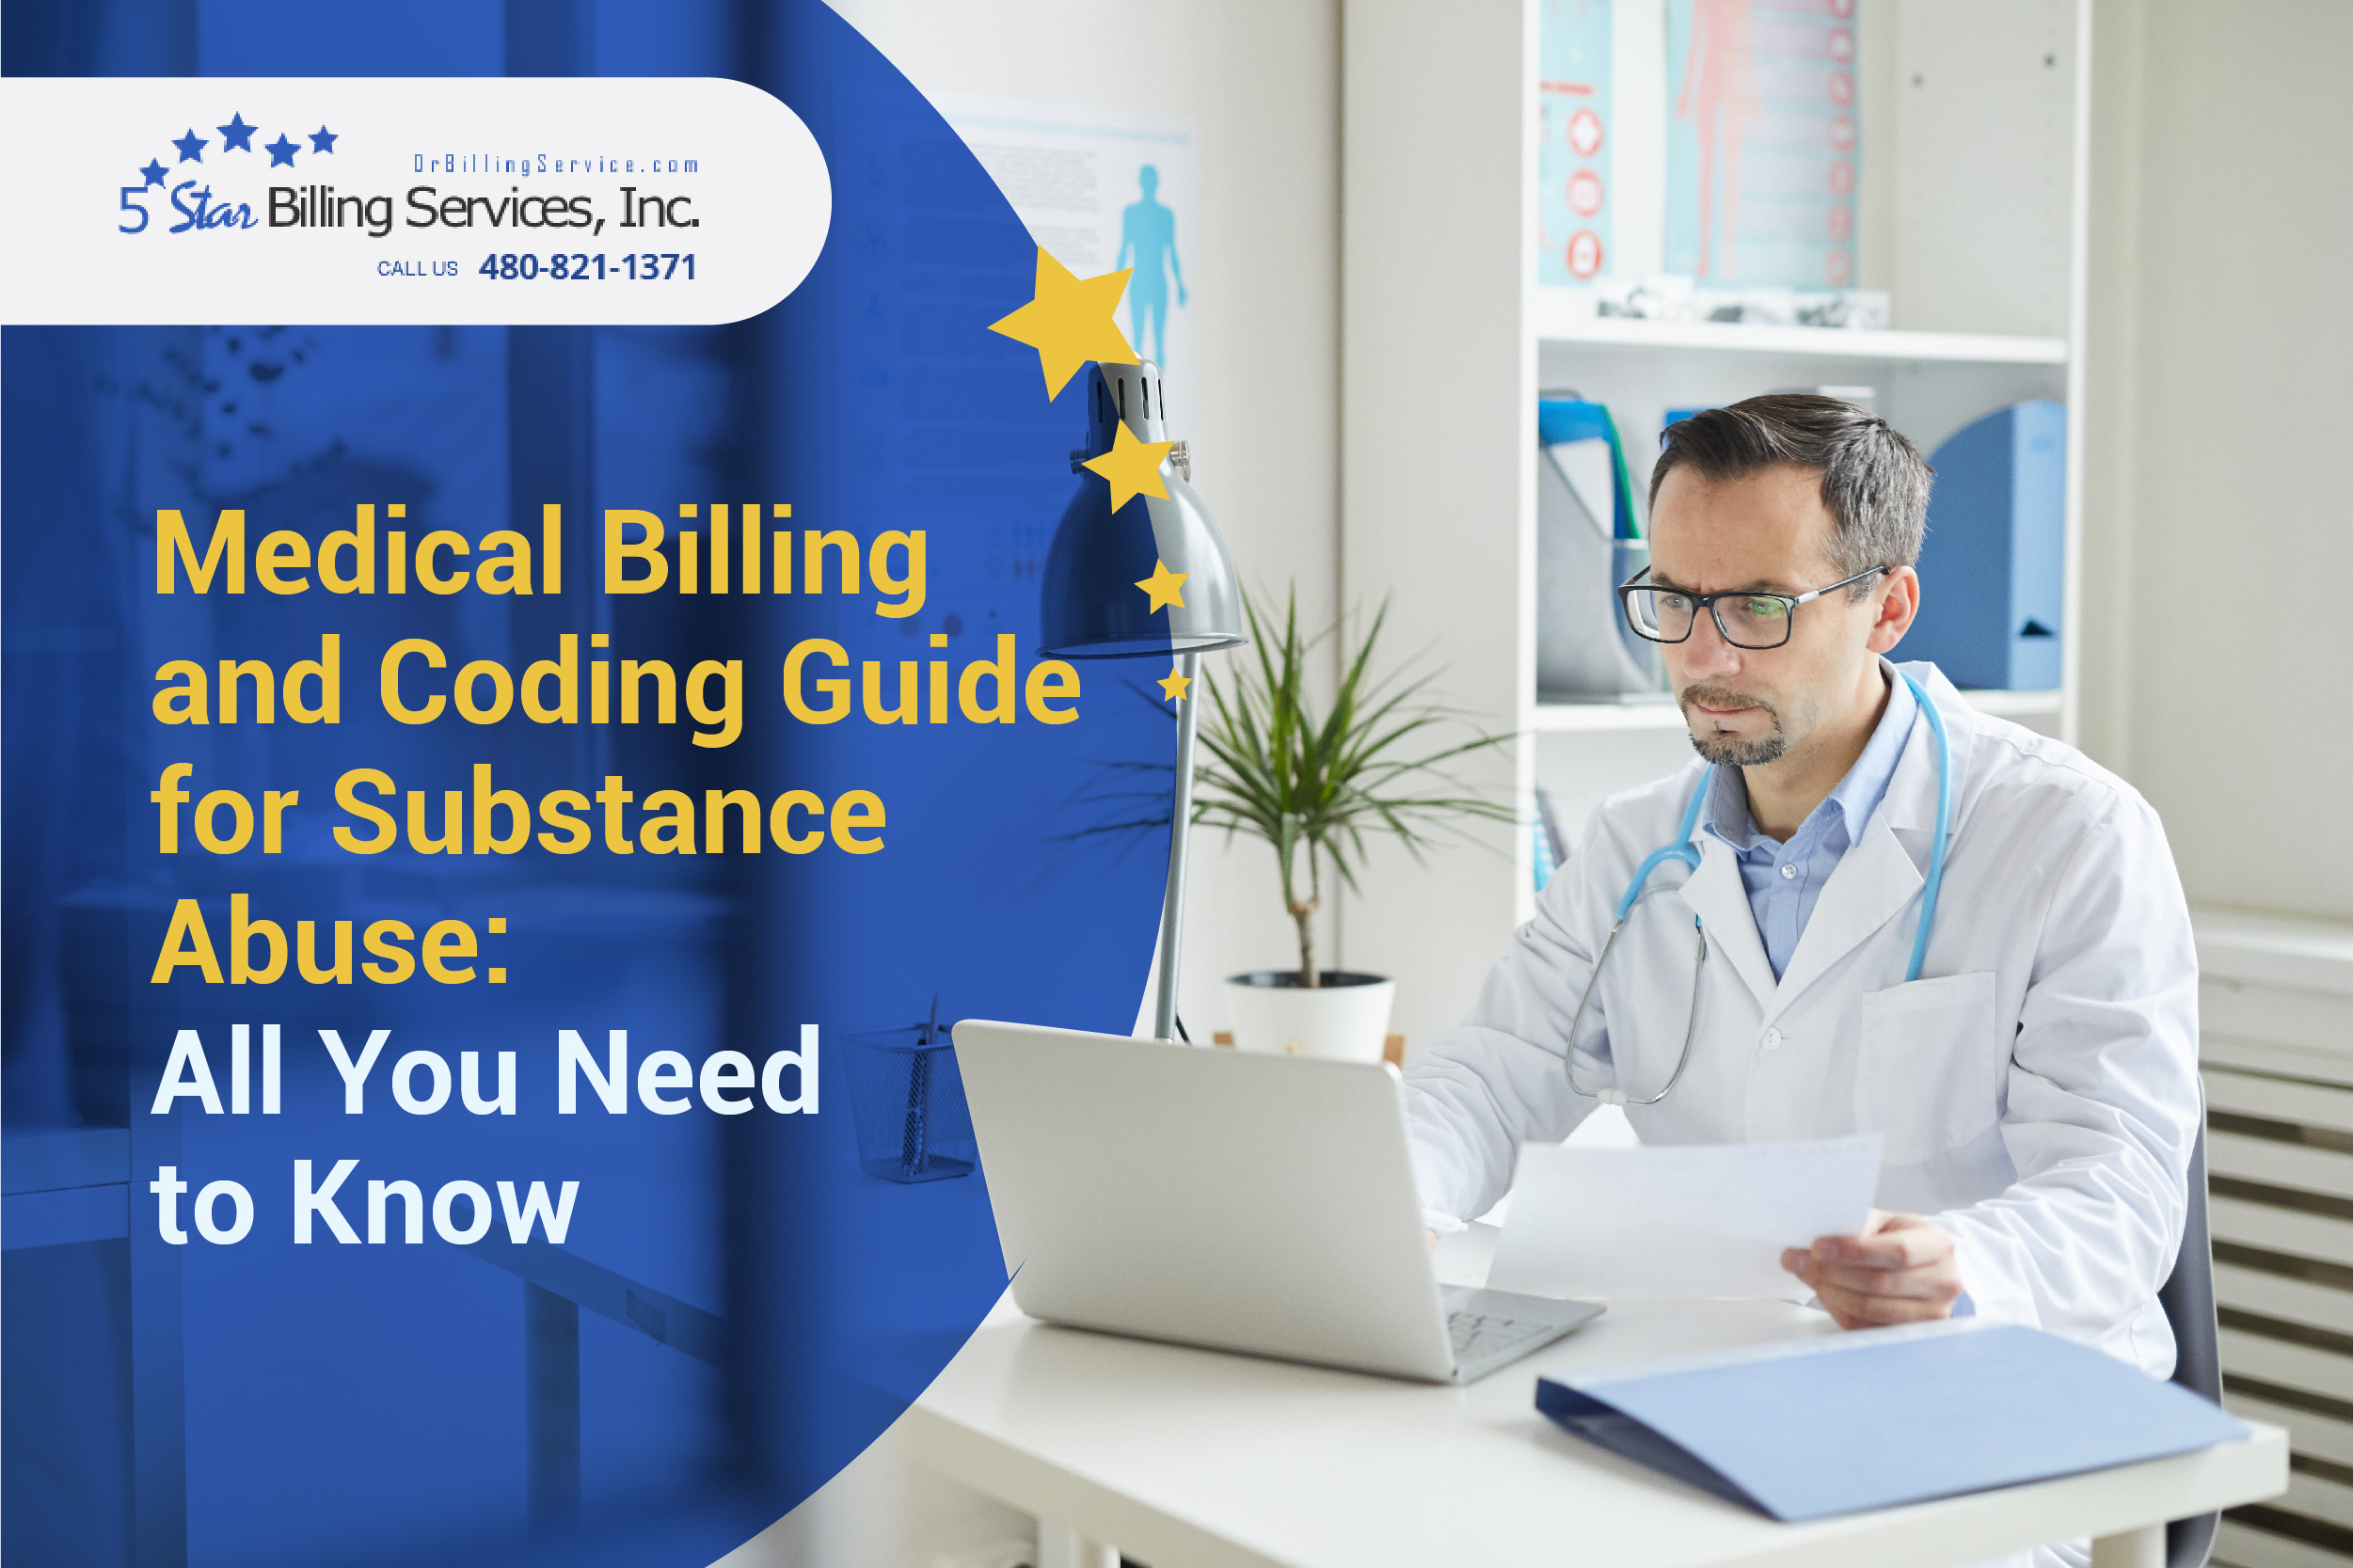 Medical Billing and Coding for Substance Abuse